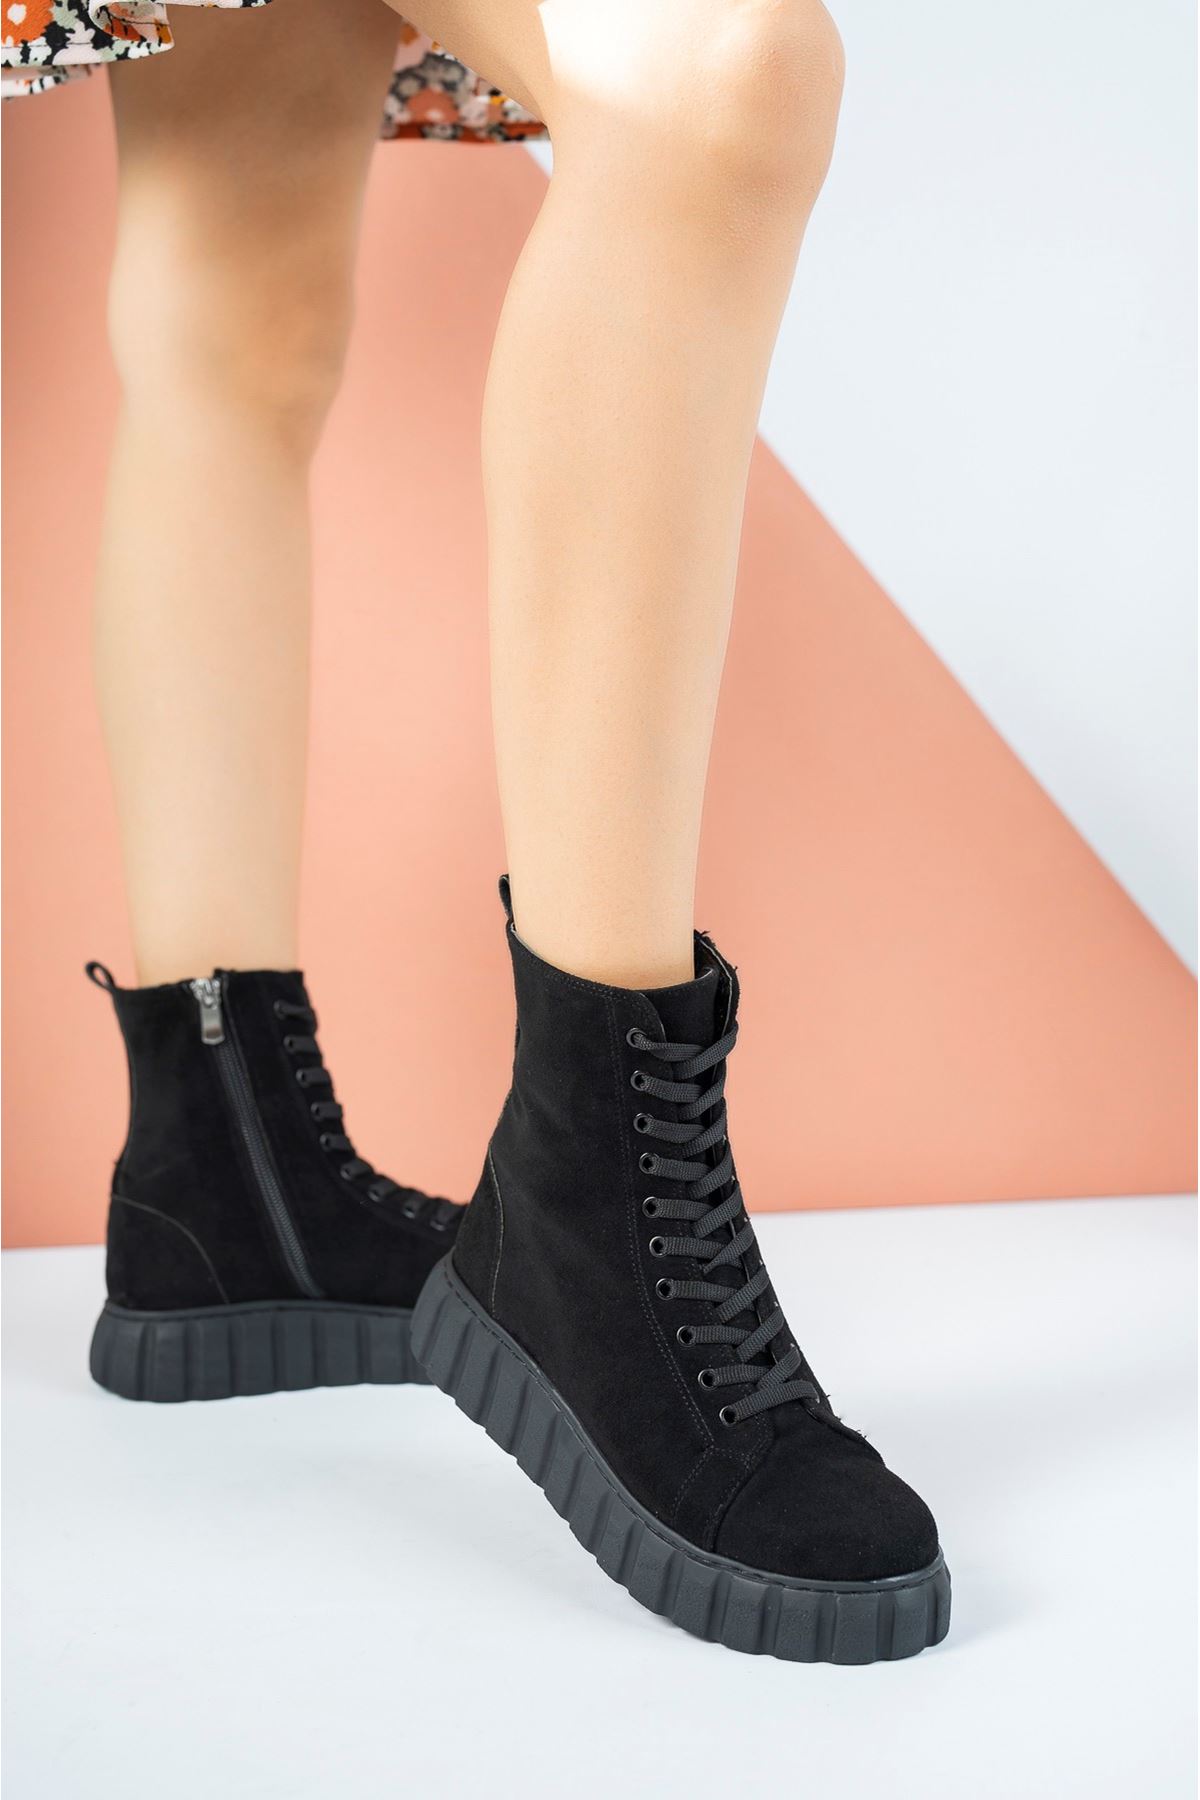 Poly Sole Black Suede Boots